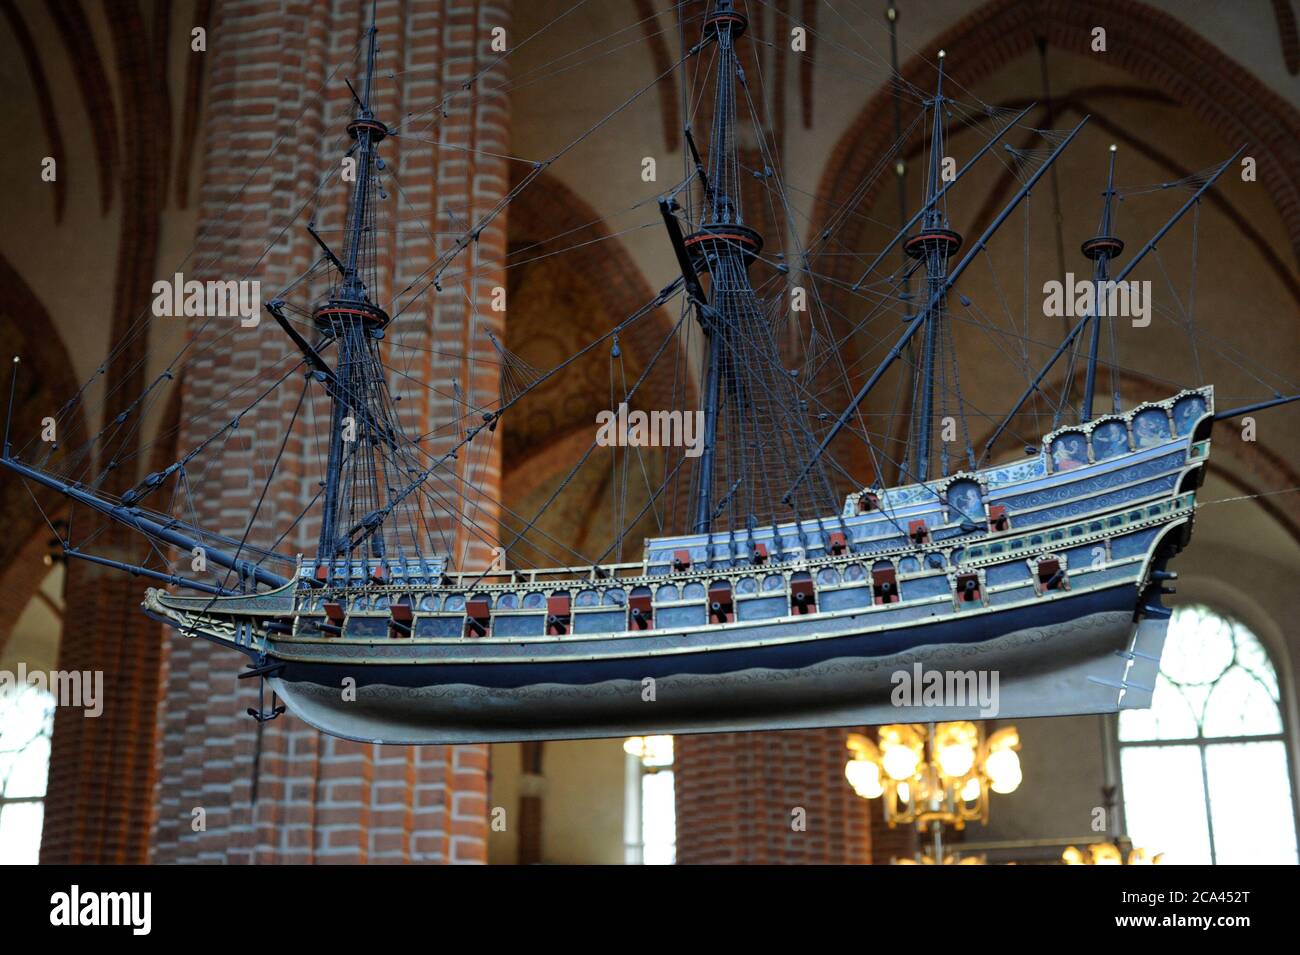 Sweden, Stockholm. English Galleon, 16th century. Votive ship hanging from the ceiling of the Cathedral of Saint Nicholas. One of the oldest votive ships in the world. This ship model is a copy of the original made in 1950s. The original ship model was built around 1600, today kept in the Museum of Maritime History in Stockholm. The ship-type is an Elizabethan galleon, as at the end of the 15th century. Stock Photo